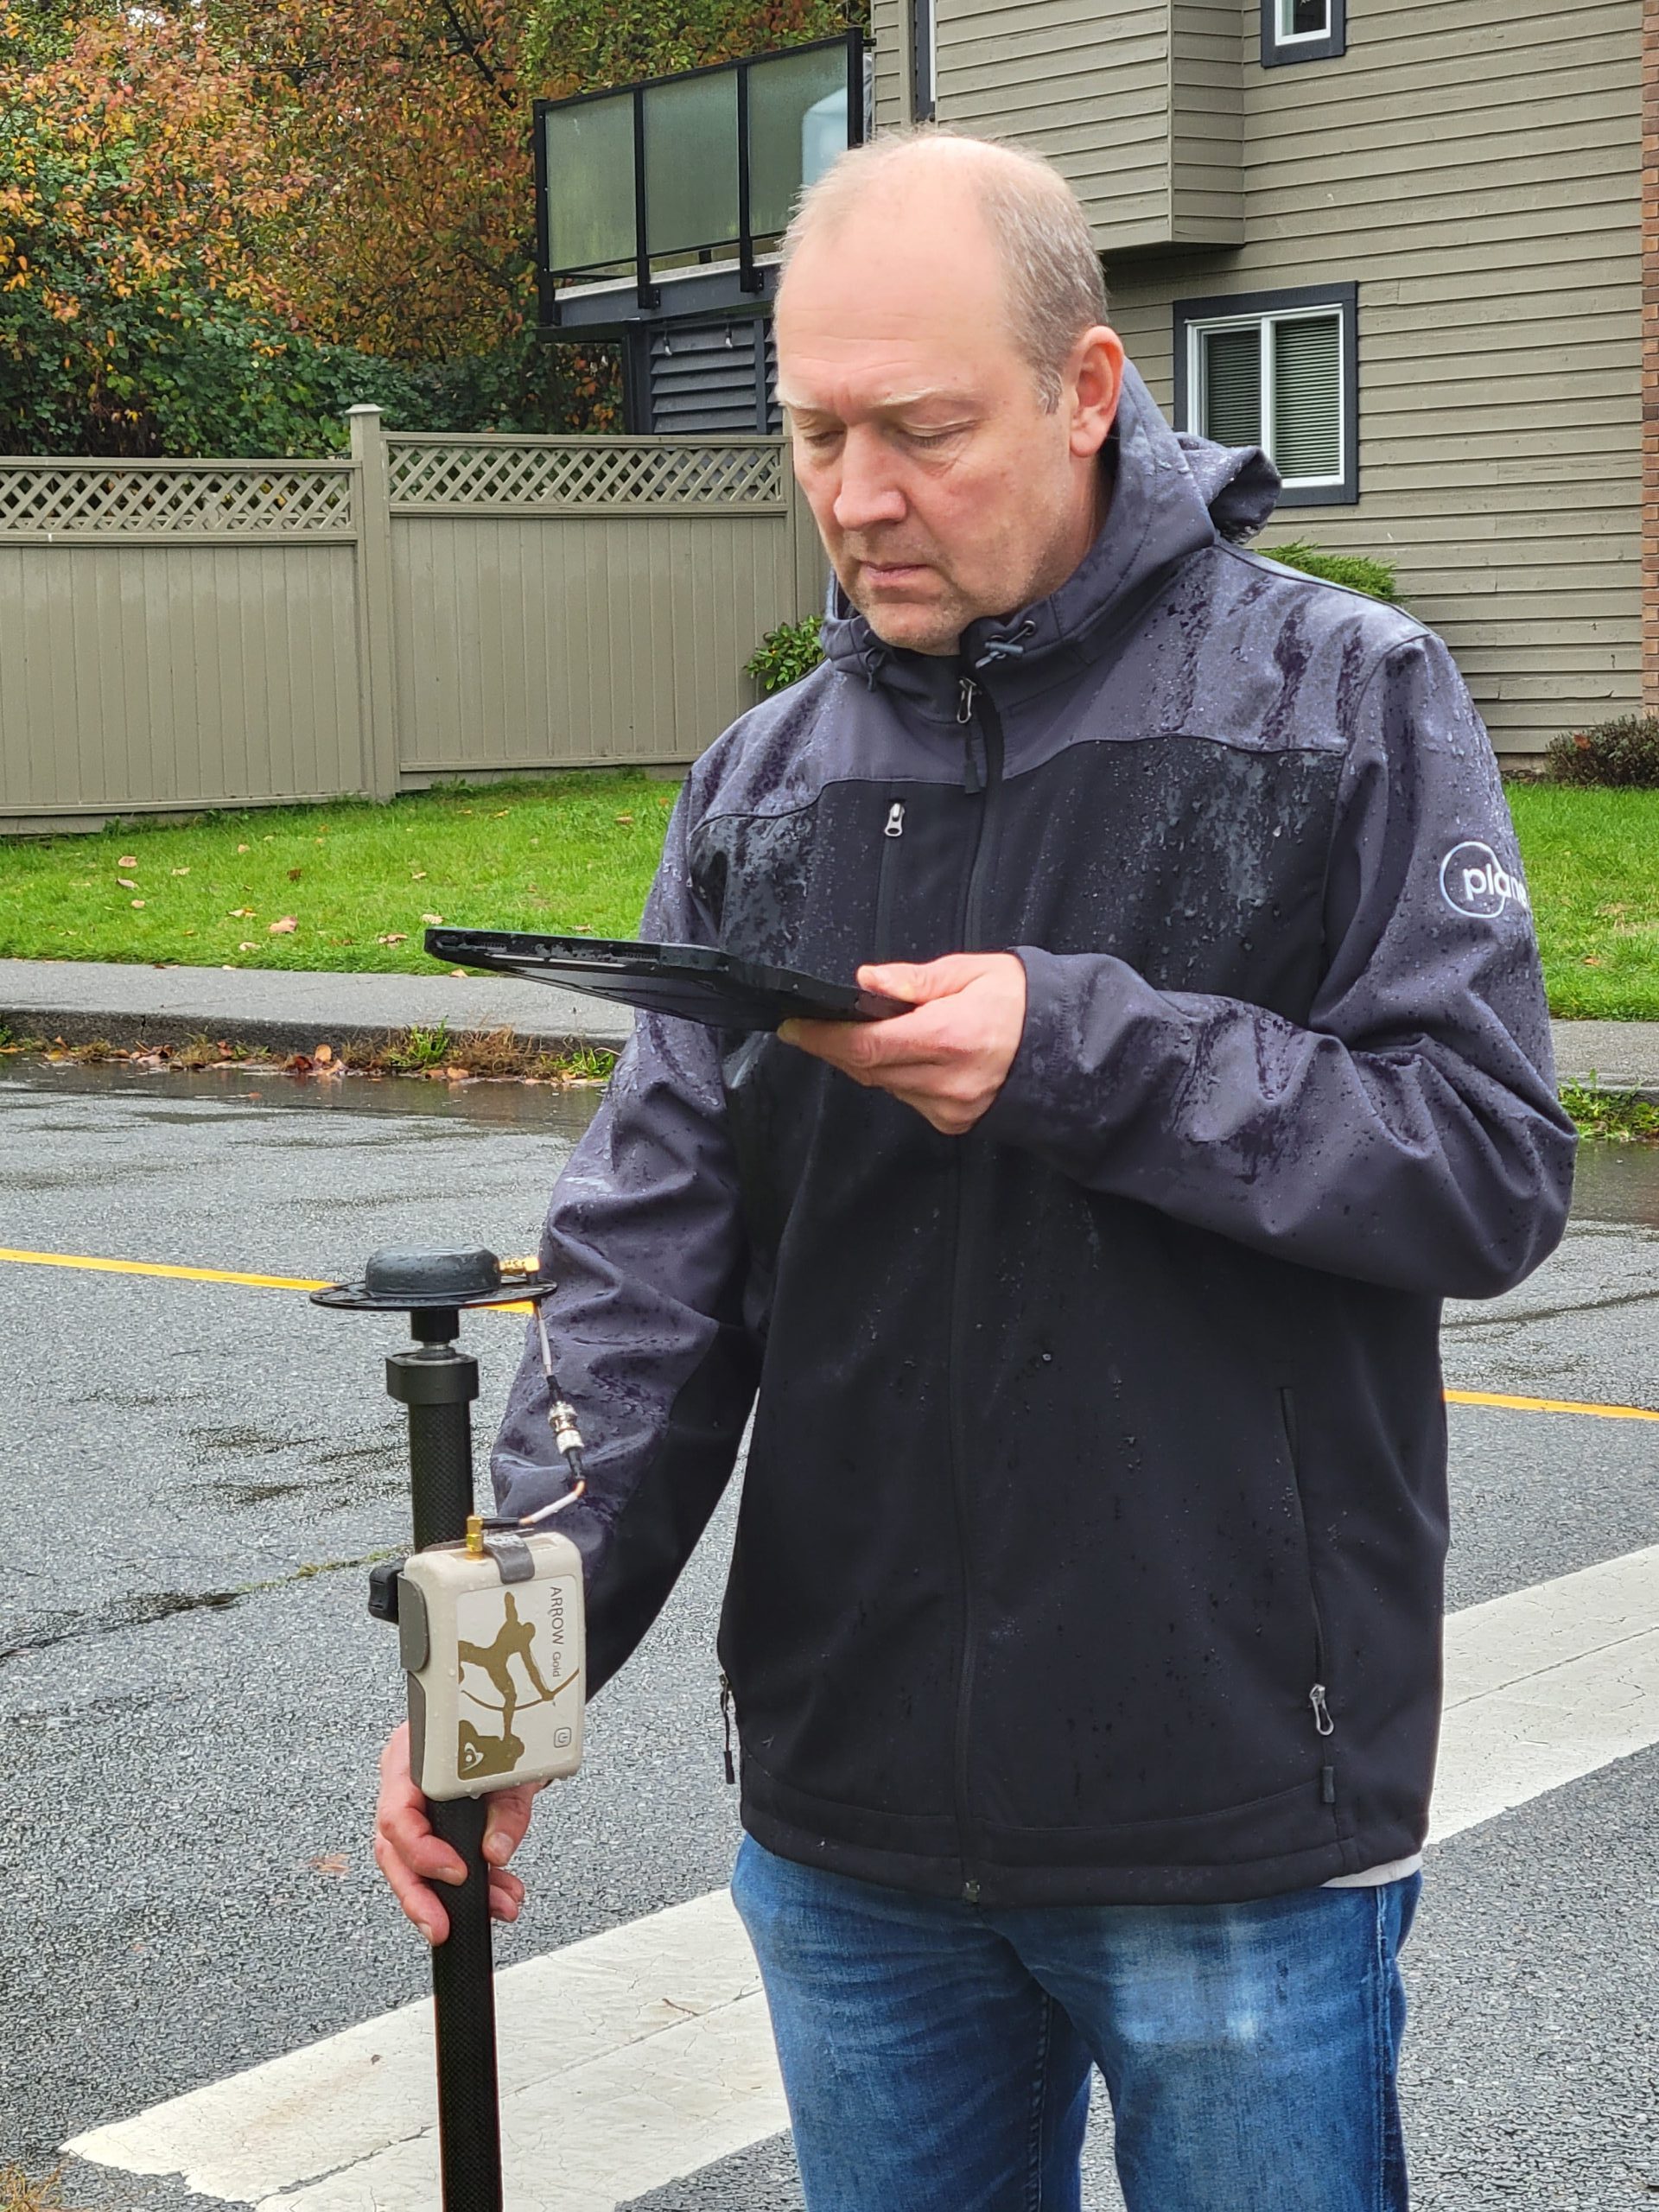 Dmitri Bagh Customer Spotlight 3 - Dmitri Bagh Looks at iPadPro for Data Collection while holding Eos Arrow GNSS Receiver on Range Pole